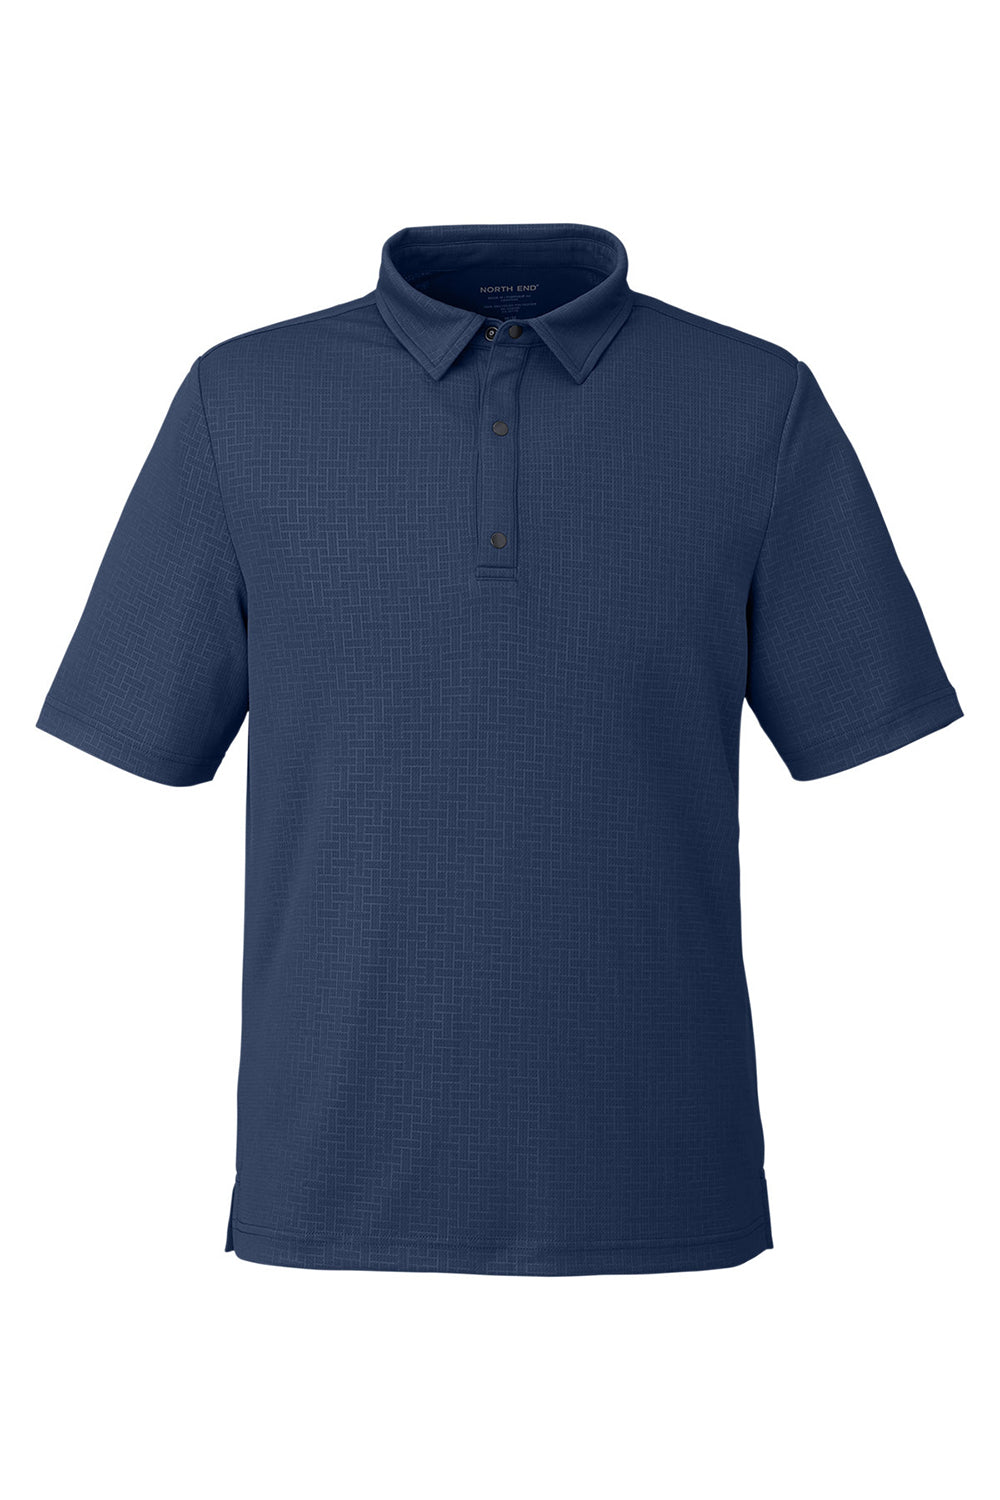 North End NE102 Mens Replay Recycled Short Sleeve Polo Shirt Classic Navy Blue Flat Front